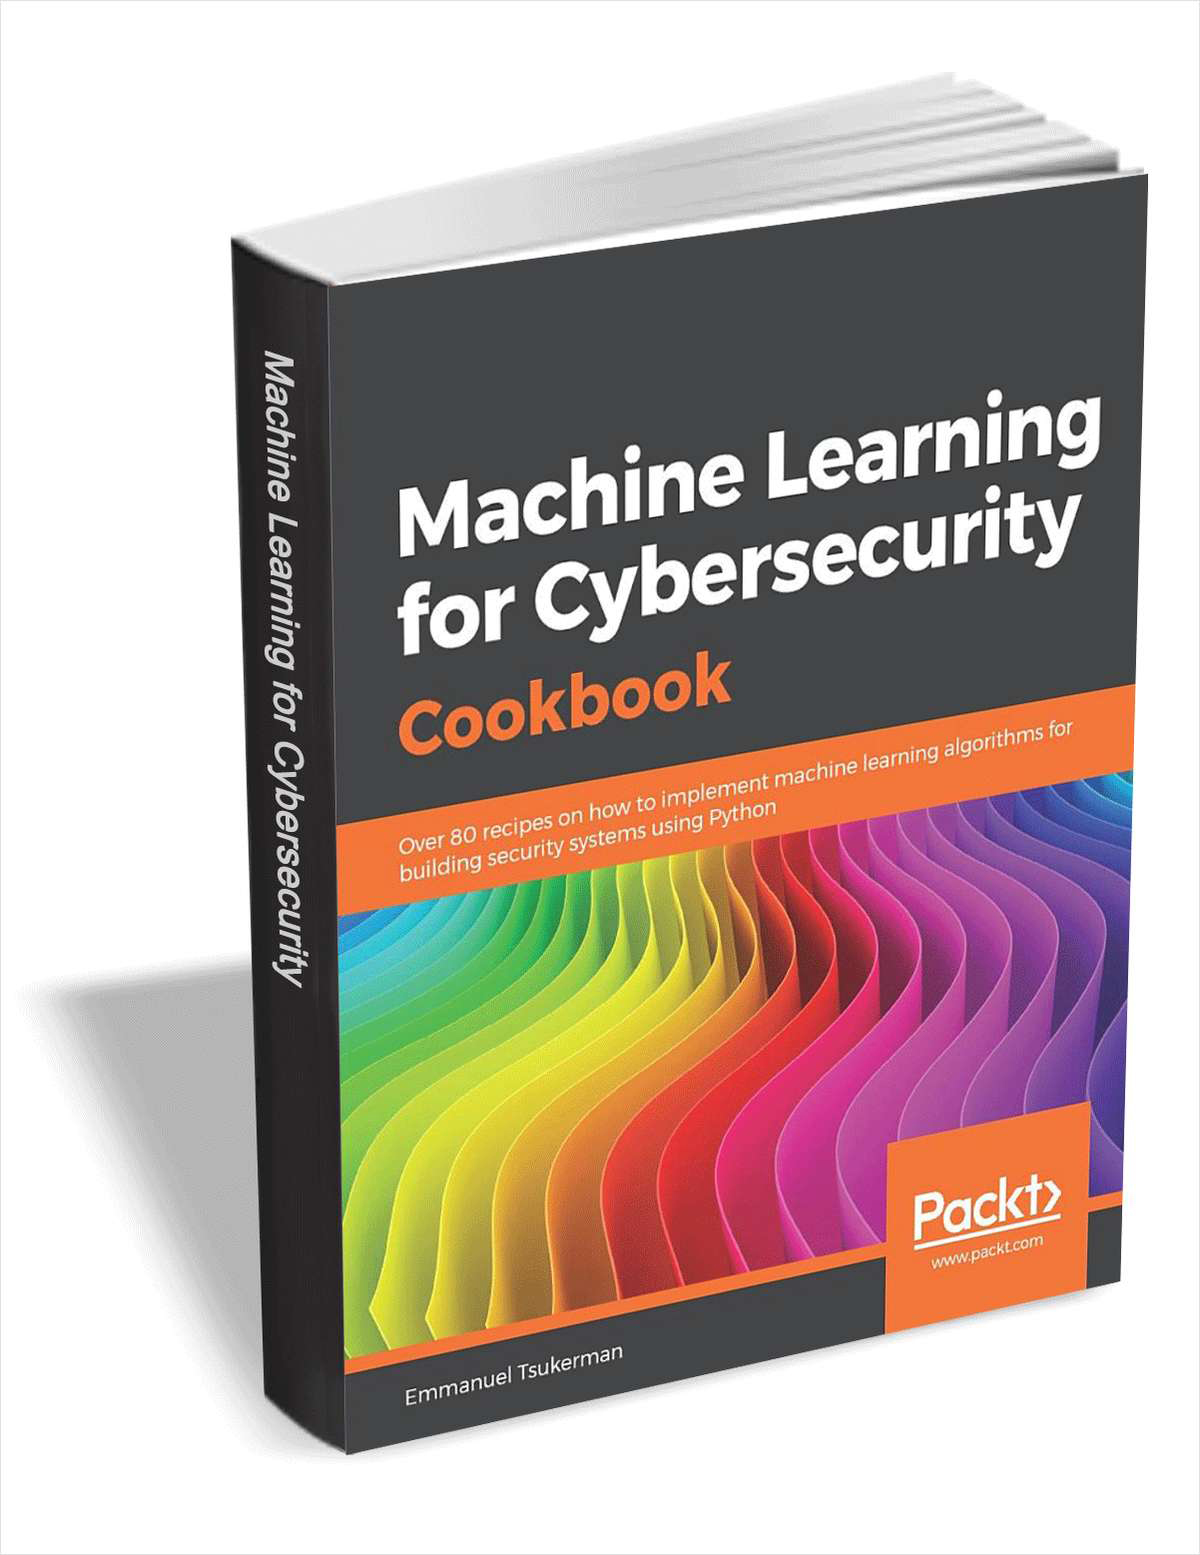 Machine Learning for Cybersecurity Cookbook ($31.99 Value) FREE for a Limited Time Screenshot